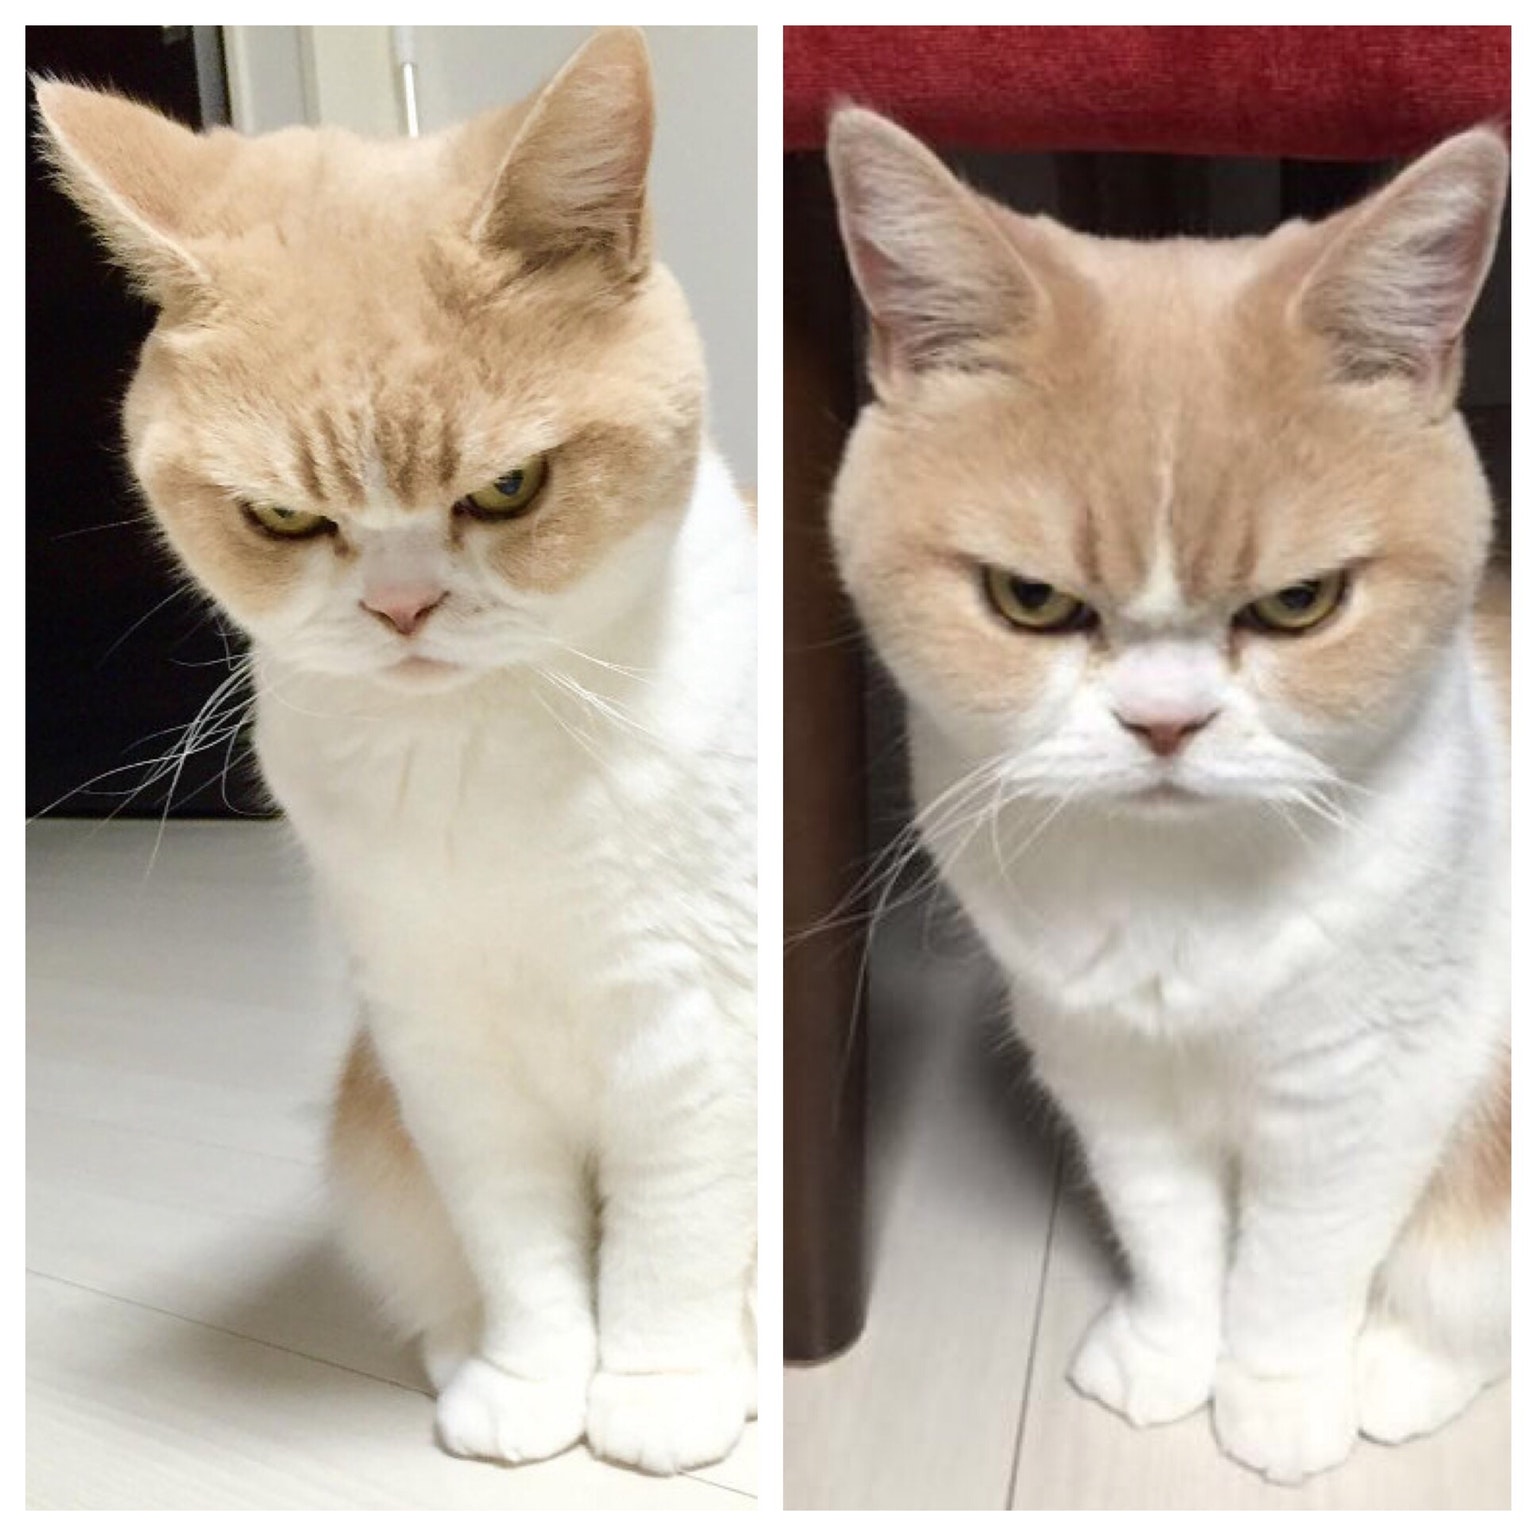 Cat before and after being called a good boy : funny